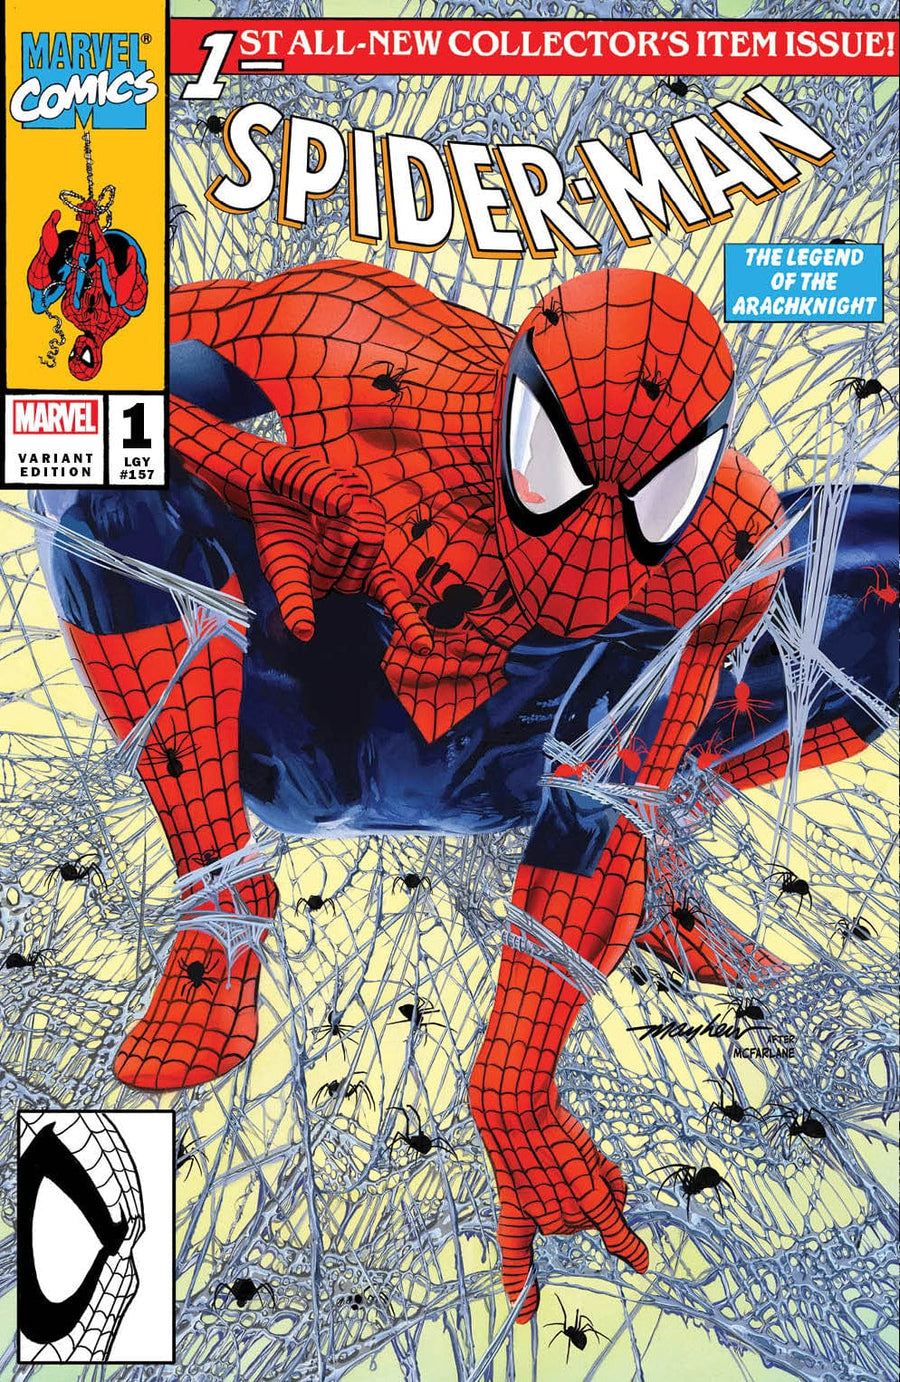 SPIDER-MAN #1 (2022) Mike Mayhew Studio Variant Cover A Trade Dress Raw